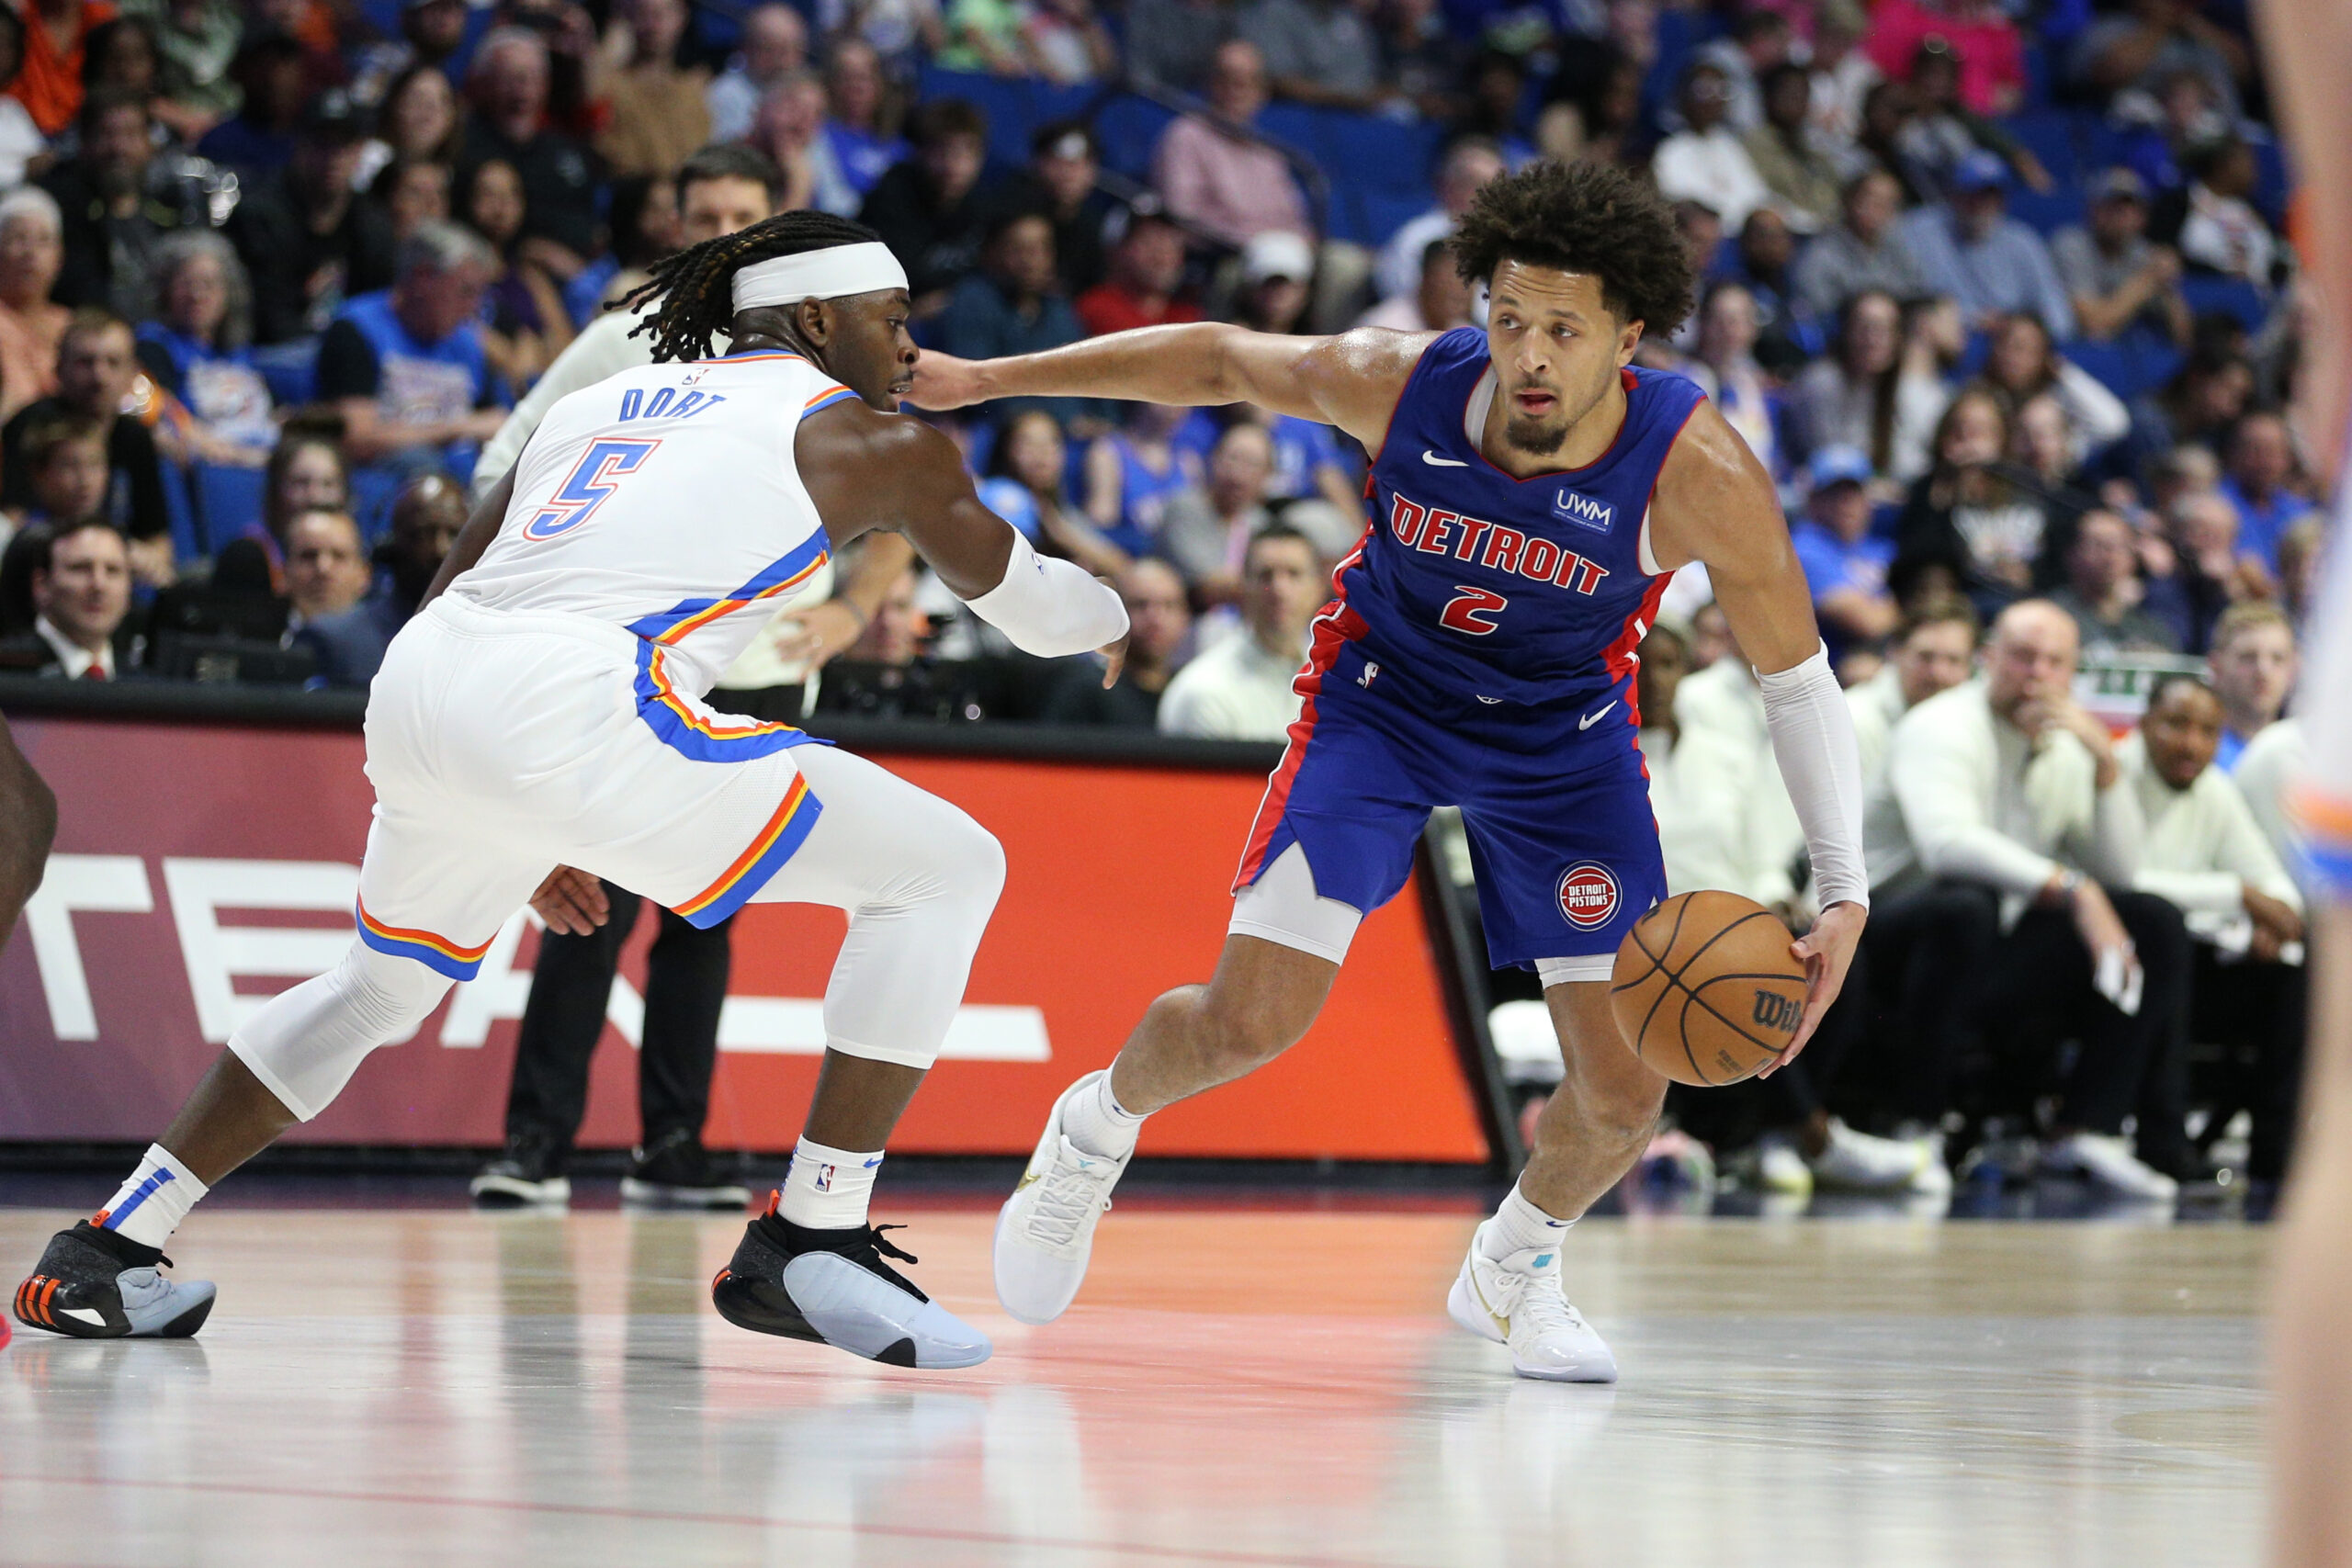 Oct 19, 2023; Tulsa, Oklahoma, USA; Detroit Pistons guard Cade Cunningham (2) attempts to drive around Oklahoma City Thunder guard Luguentz Dort (5) in the first half at BOK Center. Mandatory Credit: Joey Johnson-USA TODAY Sports. Article by Brandon Dent.